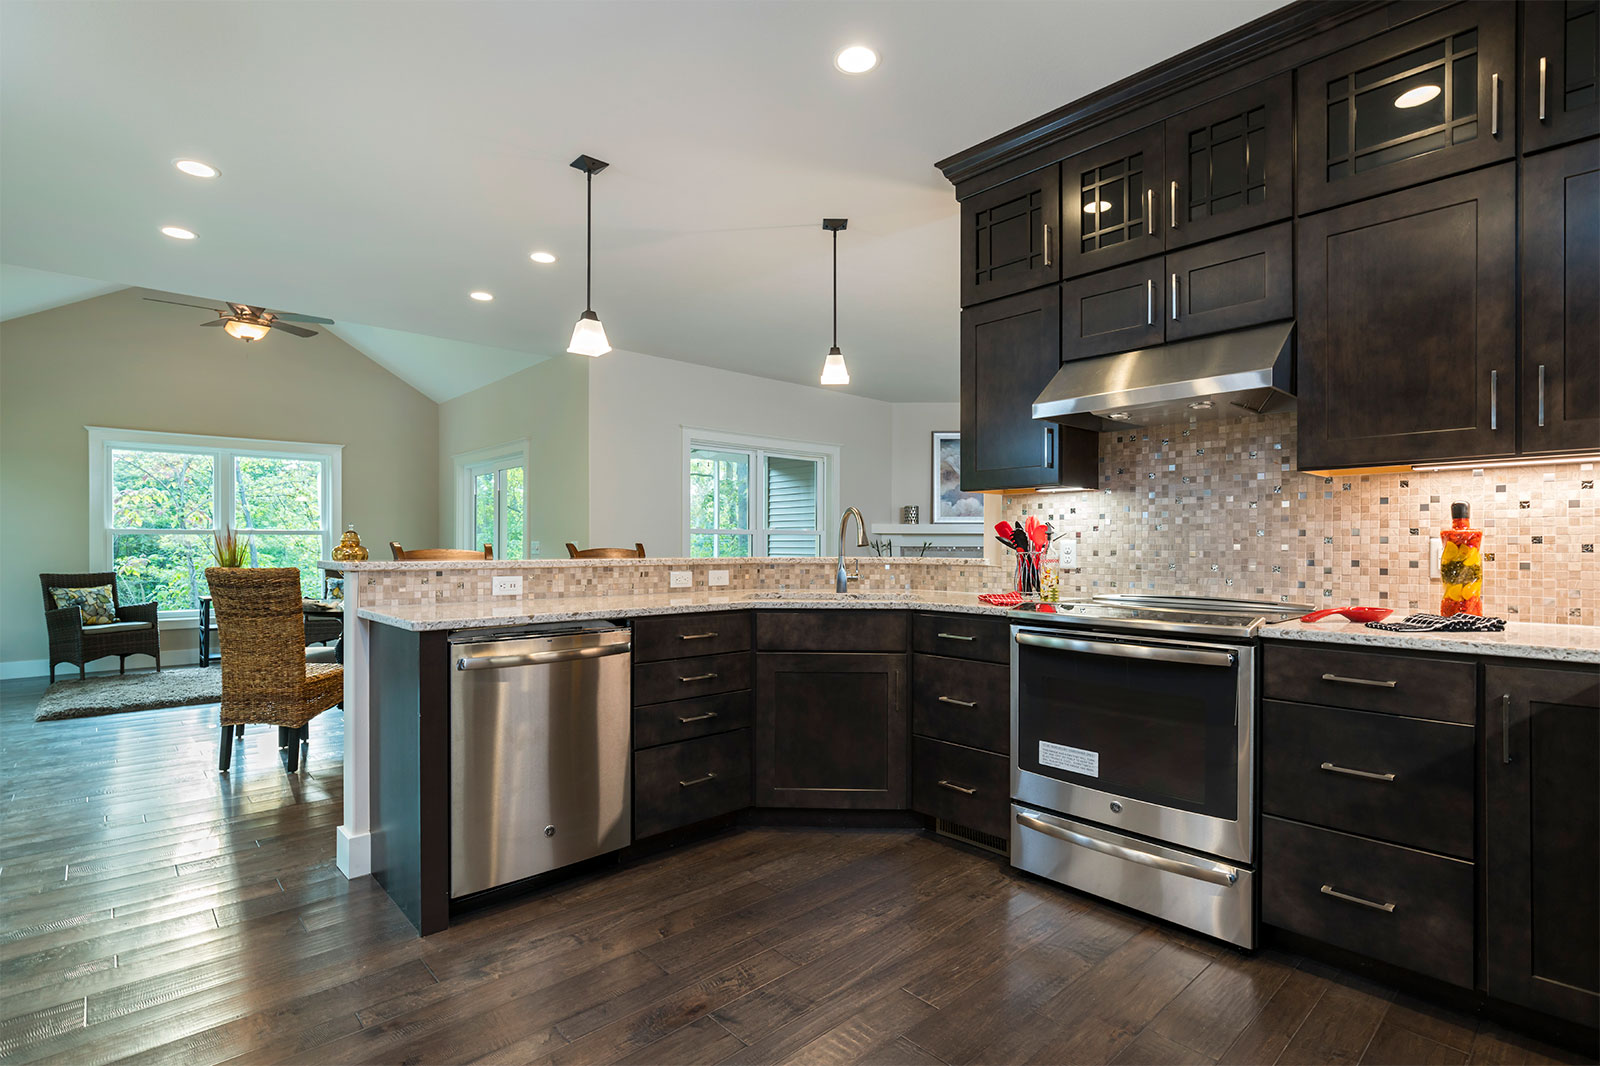 The kitchen in a luxury home from the Villas at Blystone in Monclova, Ohio, constructed by the team at Miller Diversified